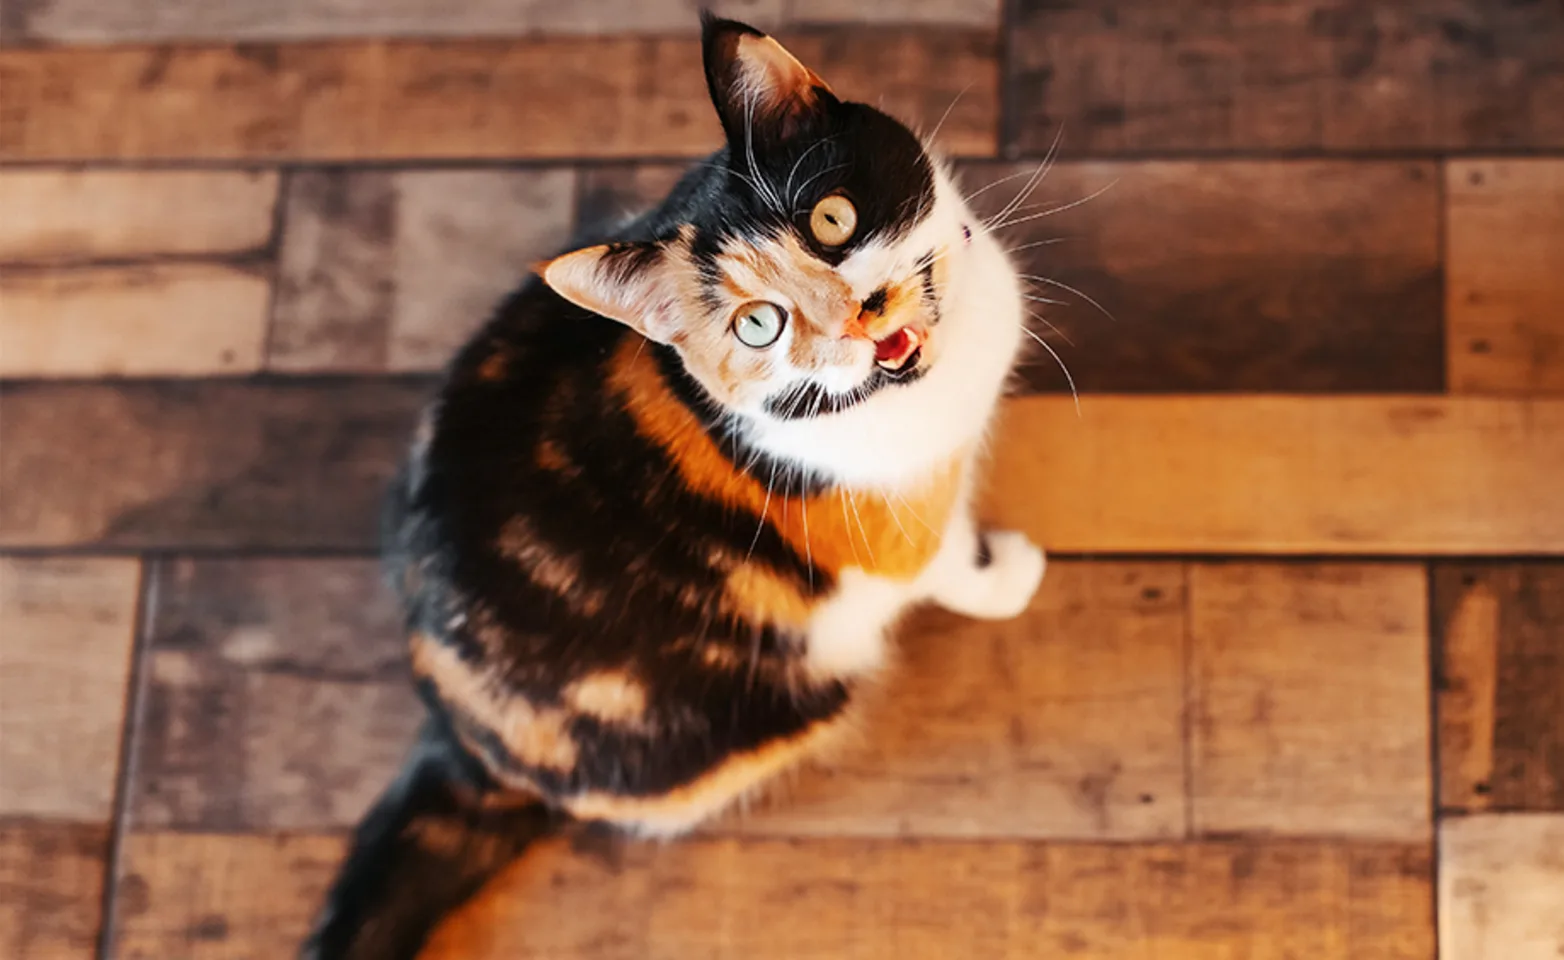 A calico cat looking up meowing on a hardwood floor